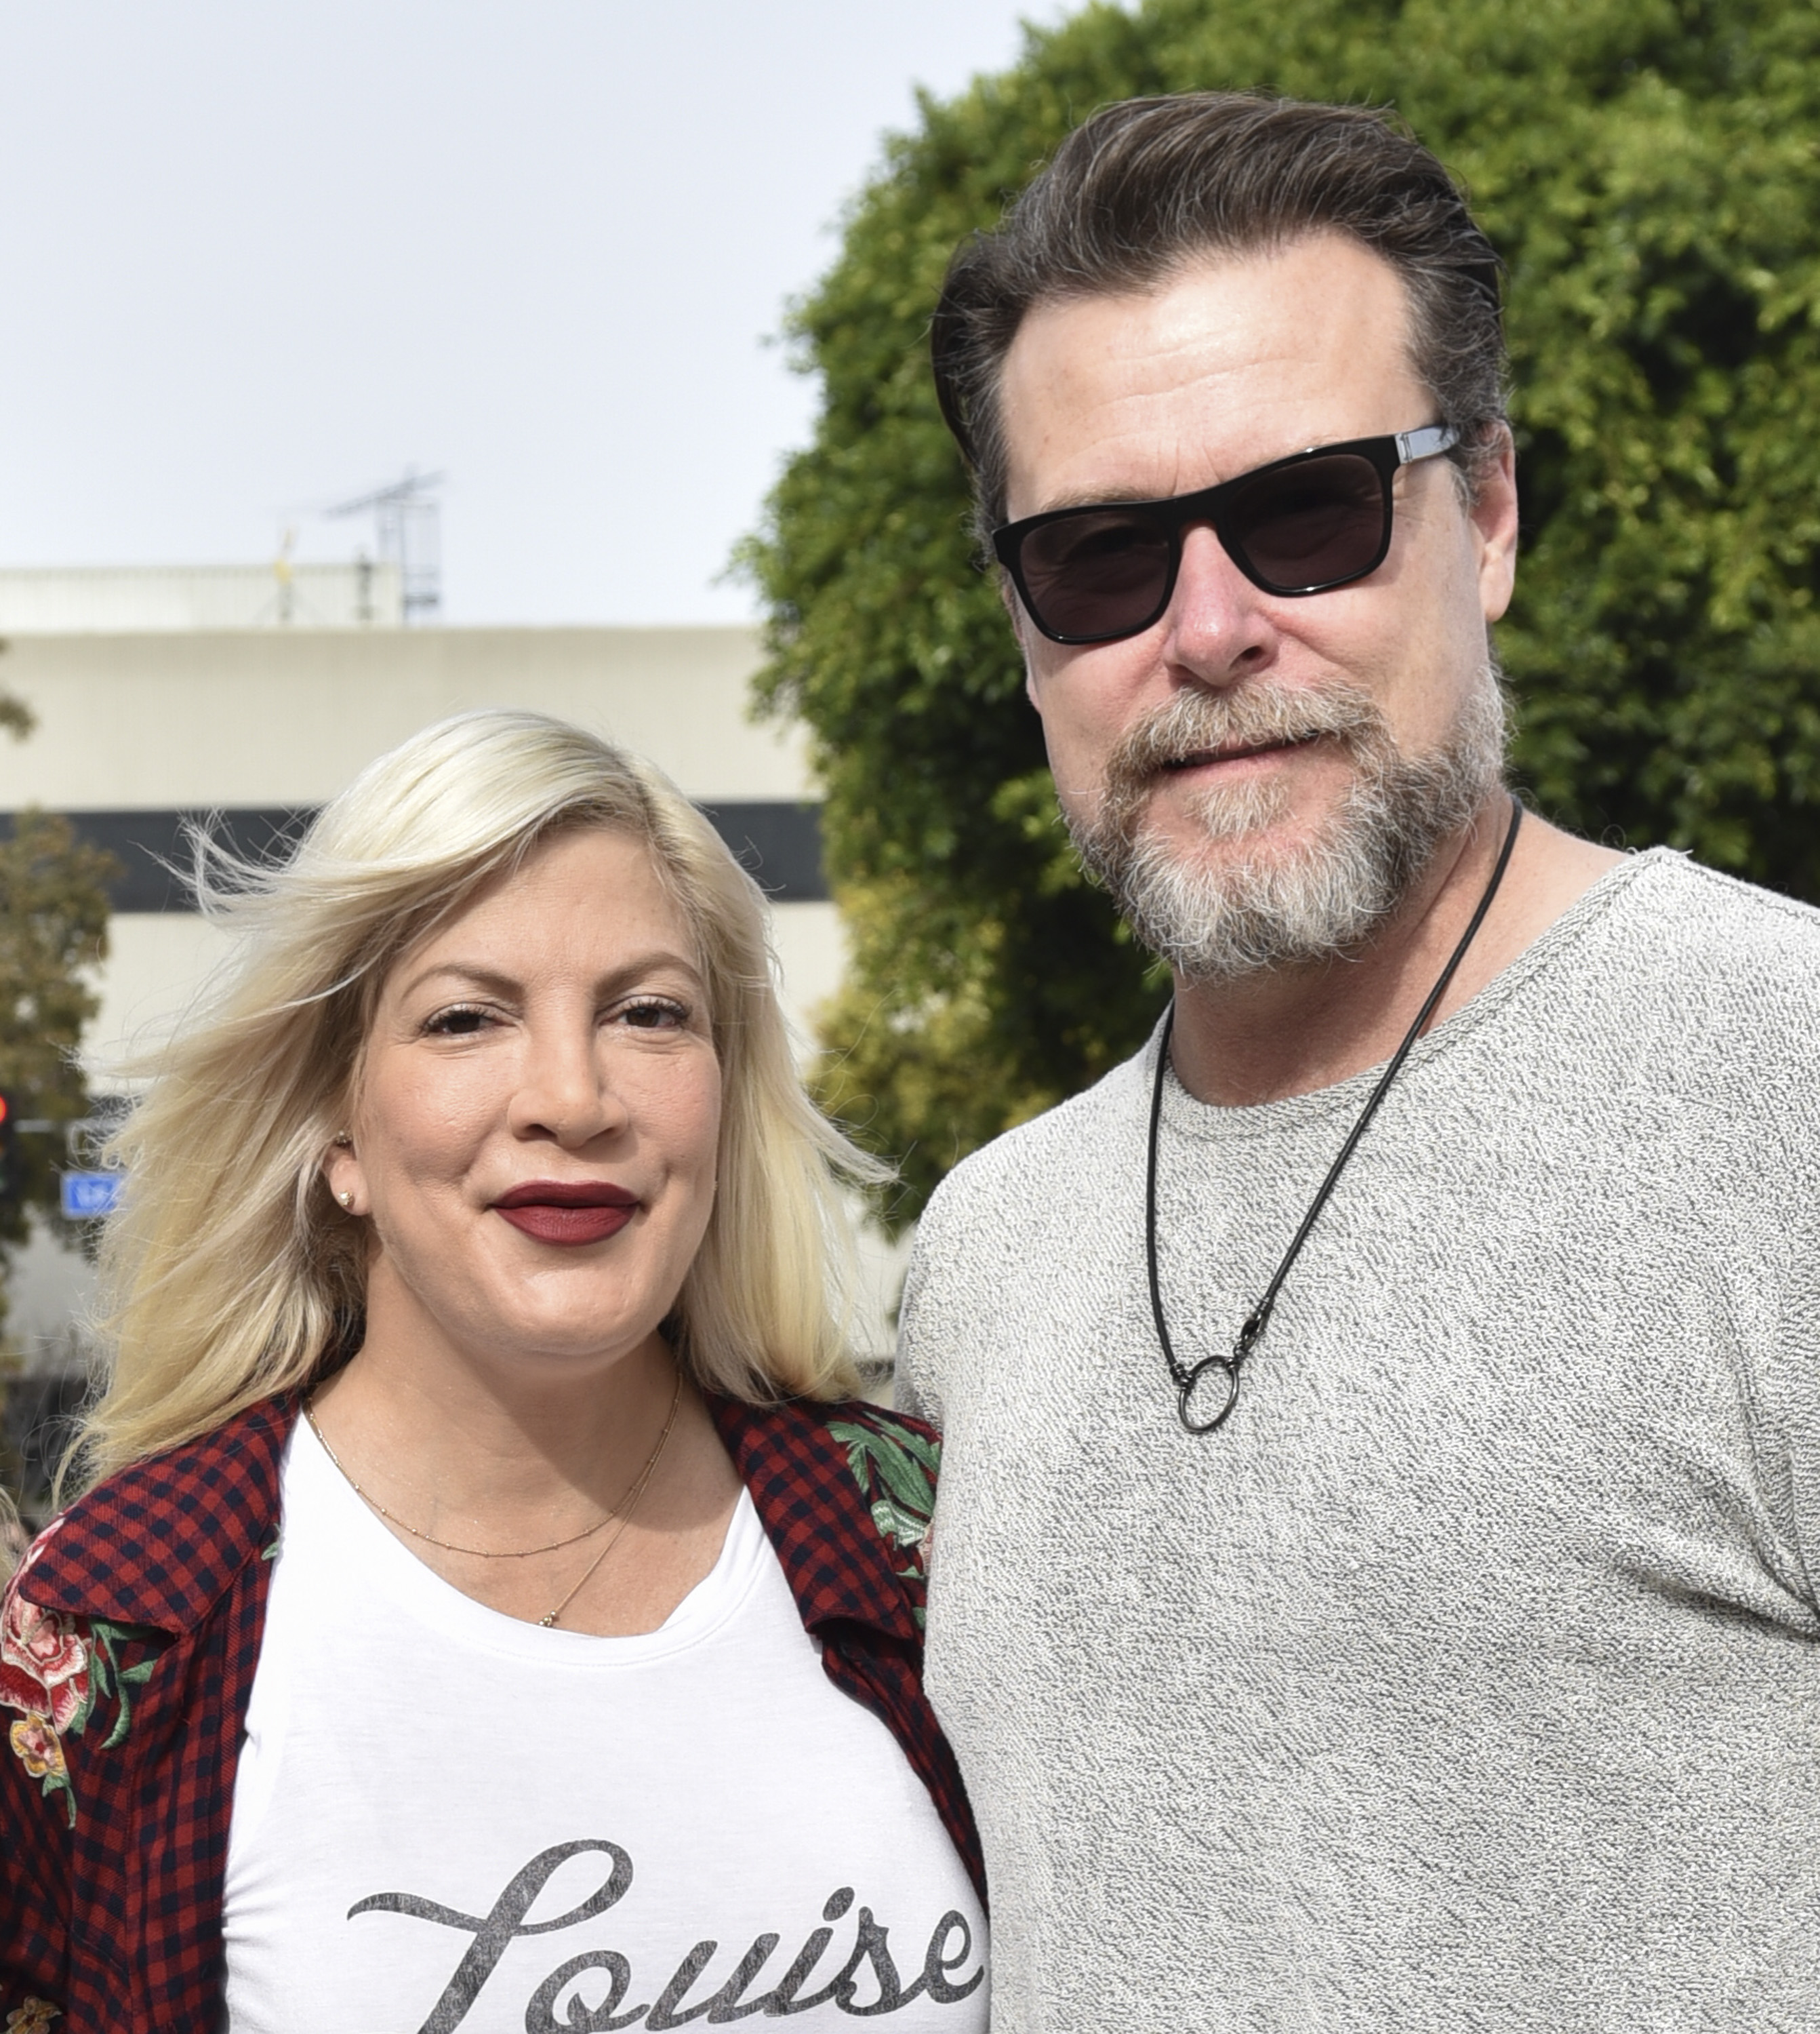 Tori Spelling and Dean McDermott pose for portrait at the premiere of Warner Bros. Pictures' "Paddington 2" After Party in Los Angeles, California, on January 6, 2018. | Source: Getty Images